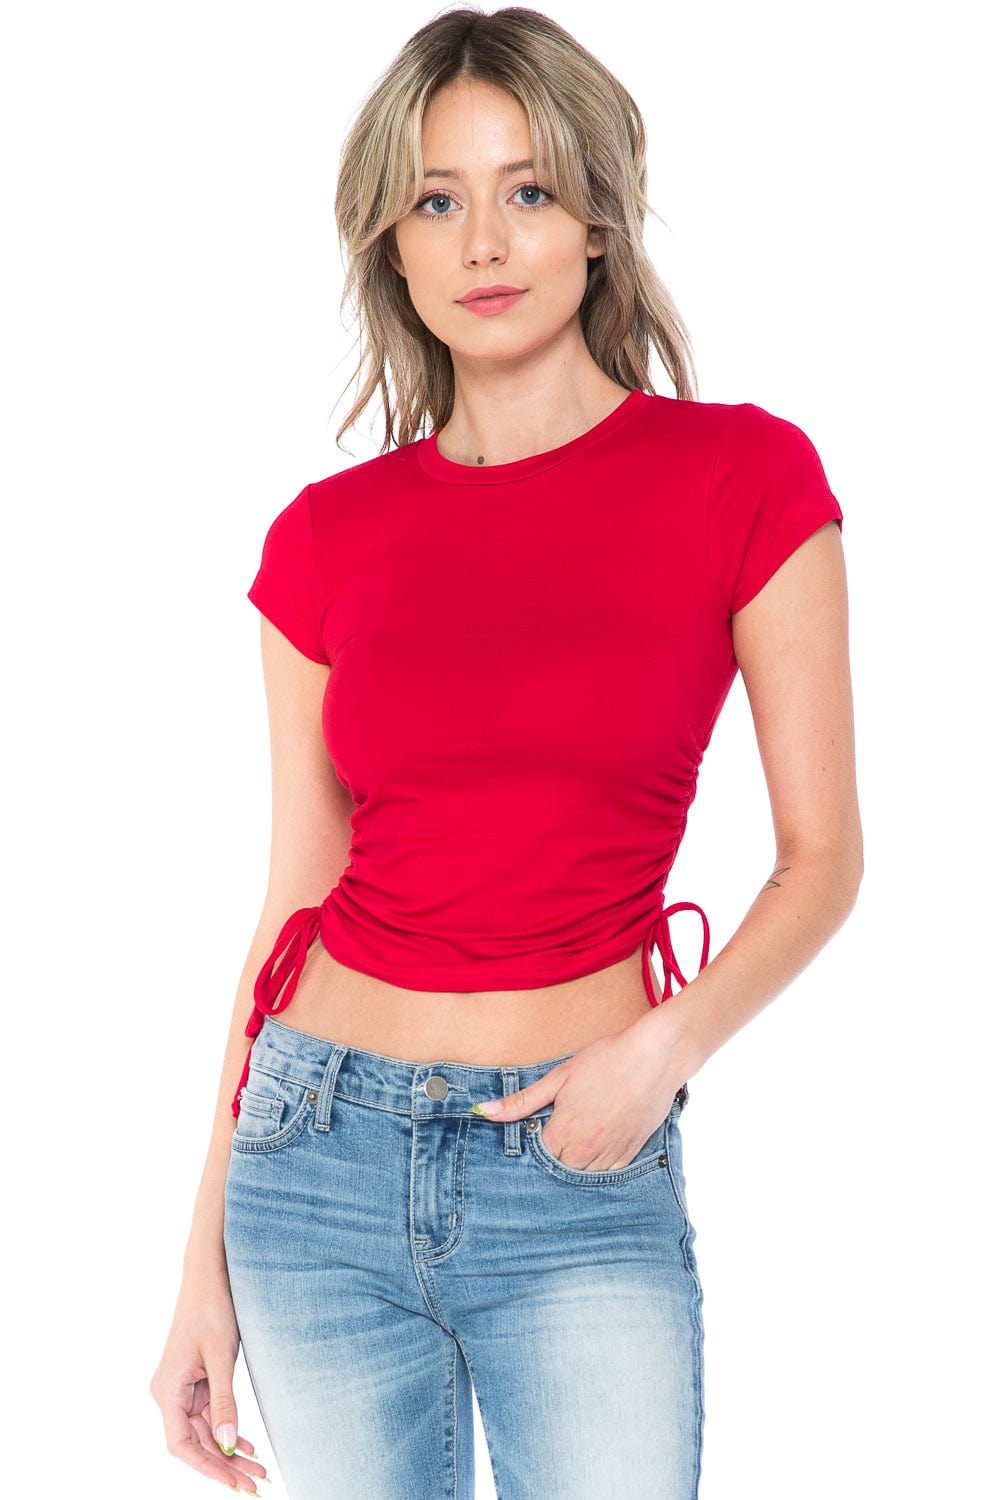 Auliné Collection Shirts & Tops Womens Trendy Solid Color Soft Basic Ruched Tie Crop Top